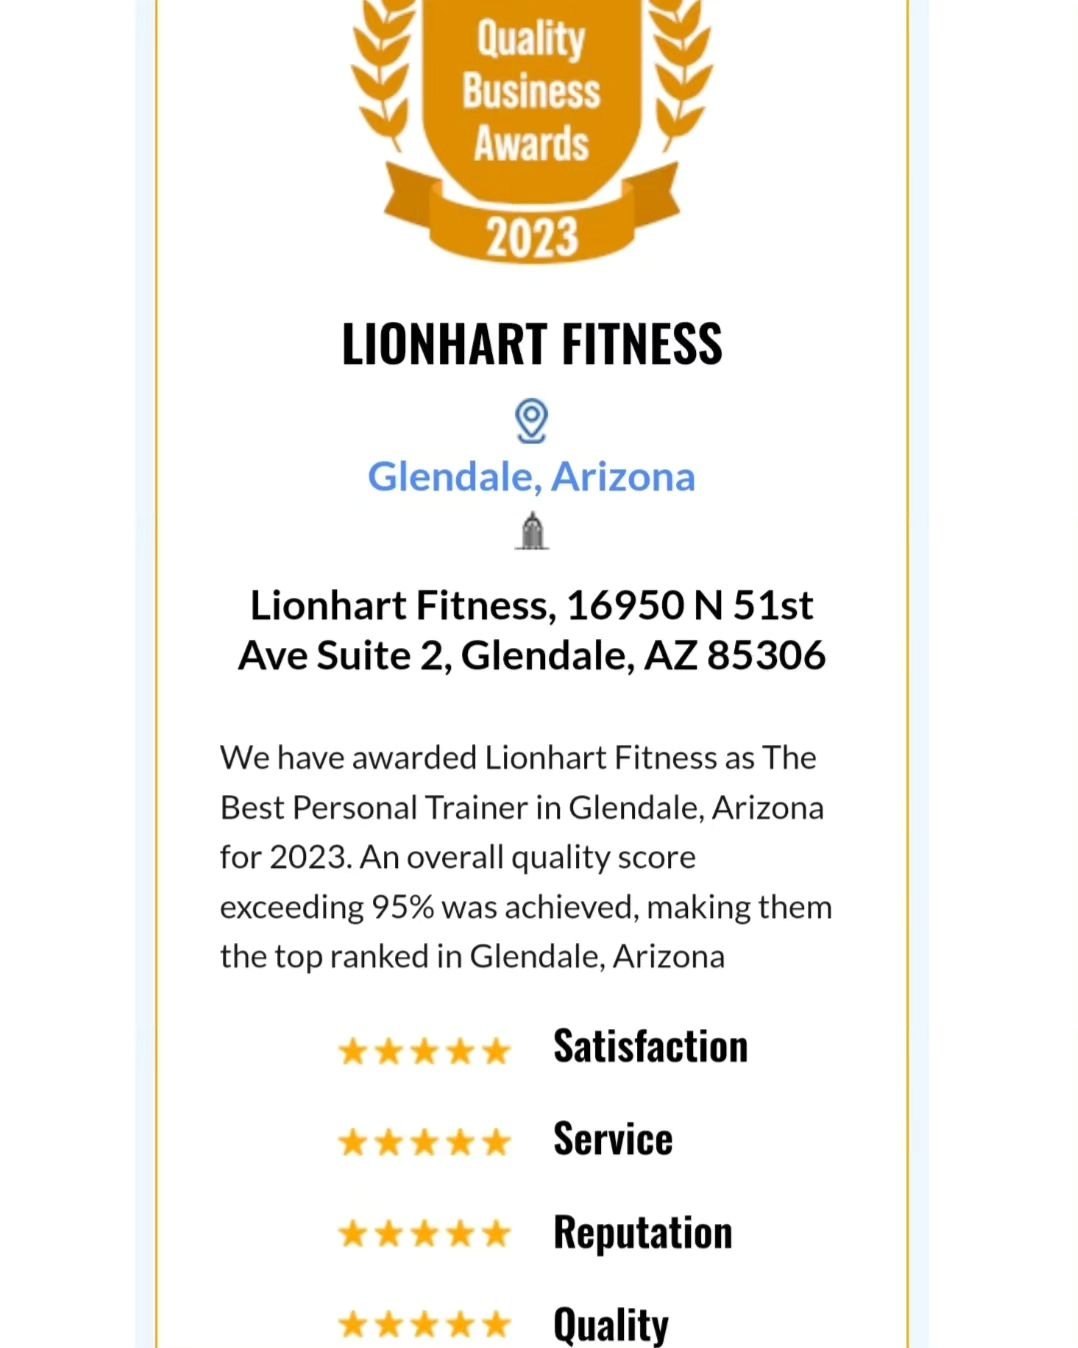 11 years later and my passion to help people has never been stronger. I am blessed and honored to be recognized for this award. 
https://qualitybusinessawards.com/2023/the-best-personal-trainer-in-glendale-arizona/lionhart-fitness?_uax=NjIxMjM6ODM2Mz